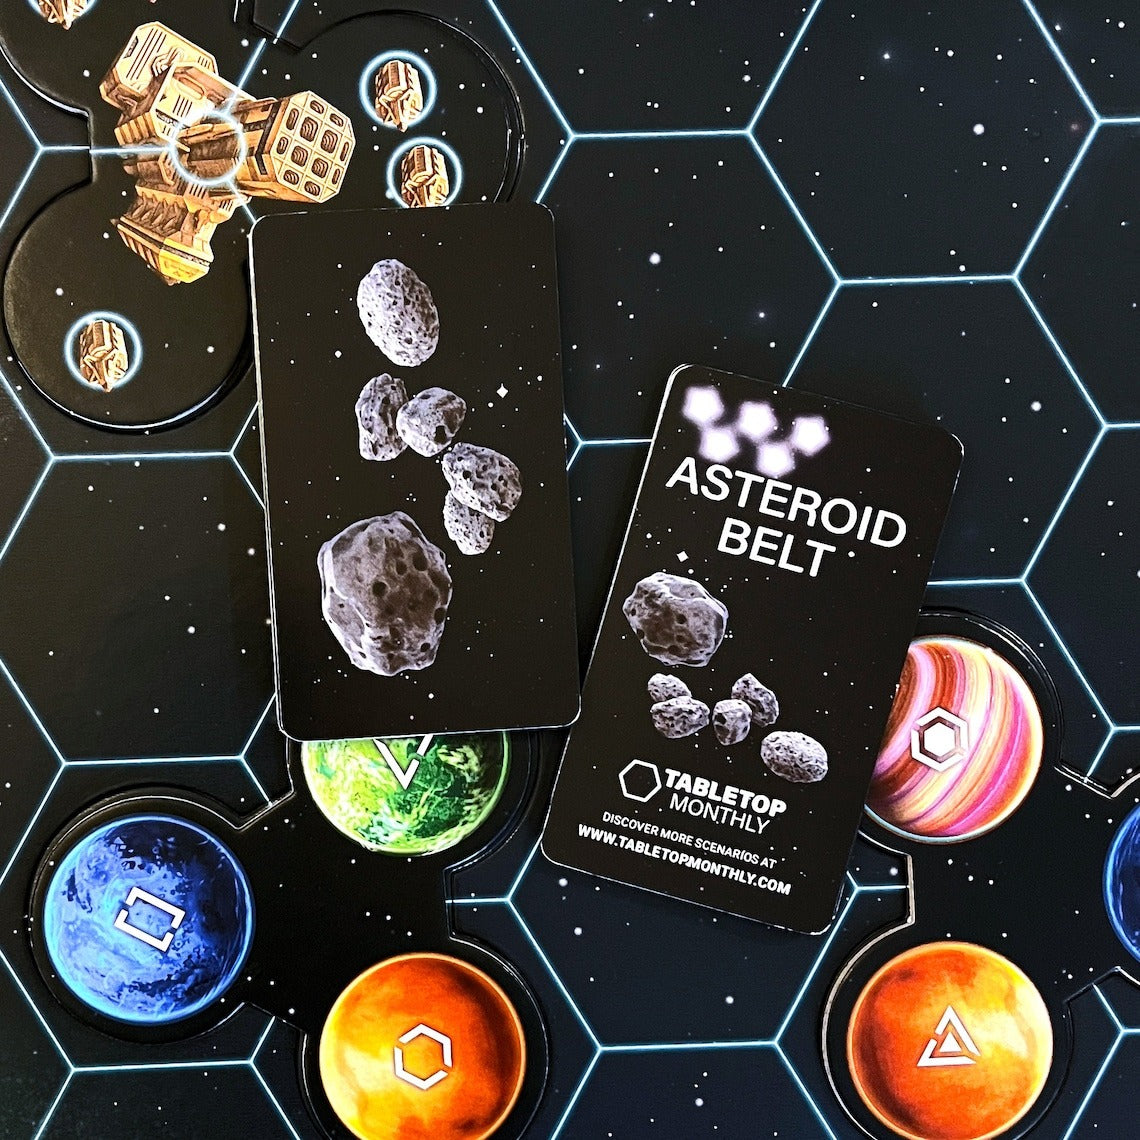 Asteroid Belt Scenario Expansion Deck compatible with Catan's Starfarers of Catan